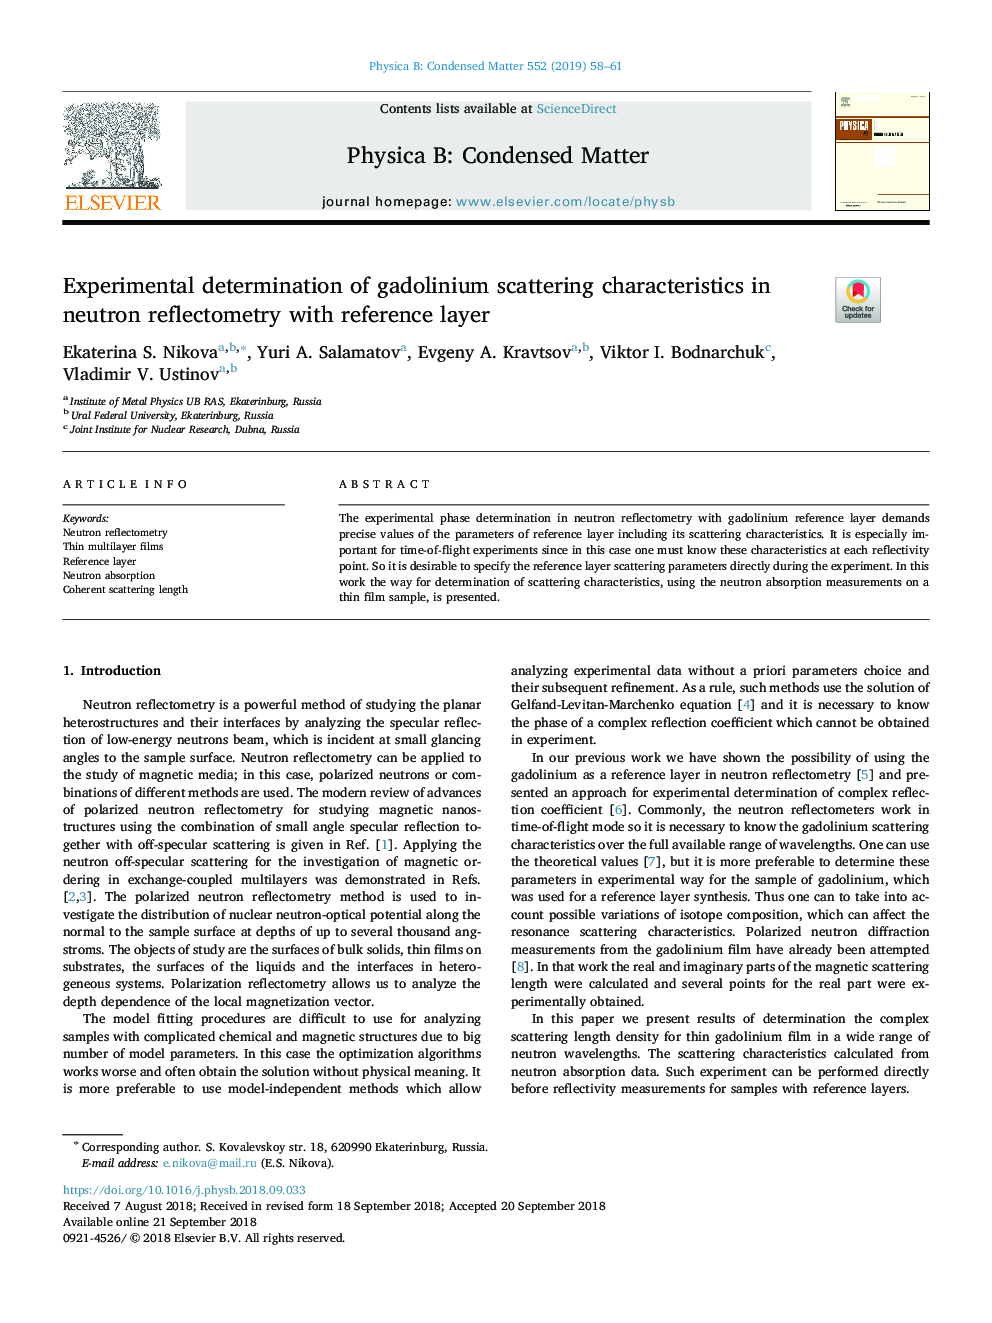 Experimental determination of gadolinium scattering characteristics in neutron reflectometry with reference layer